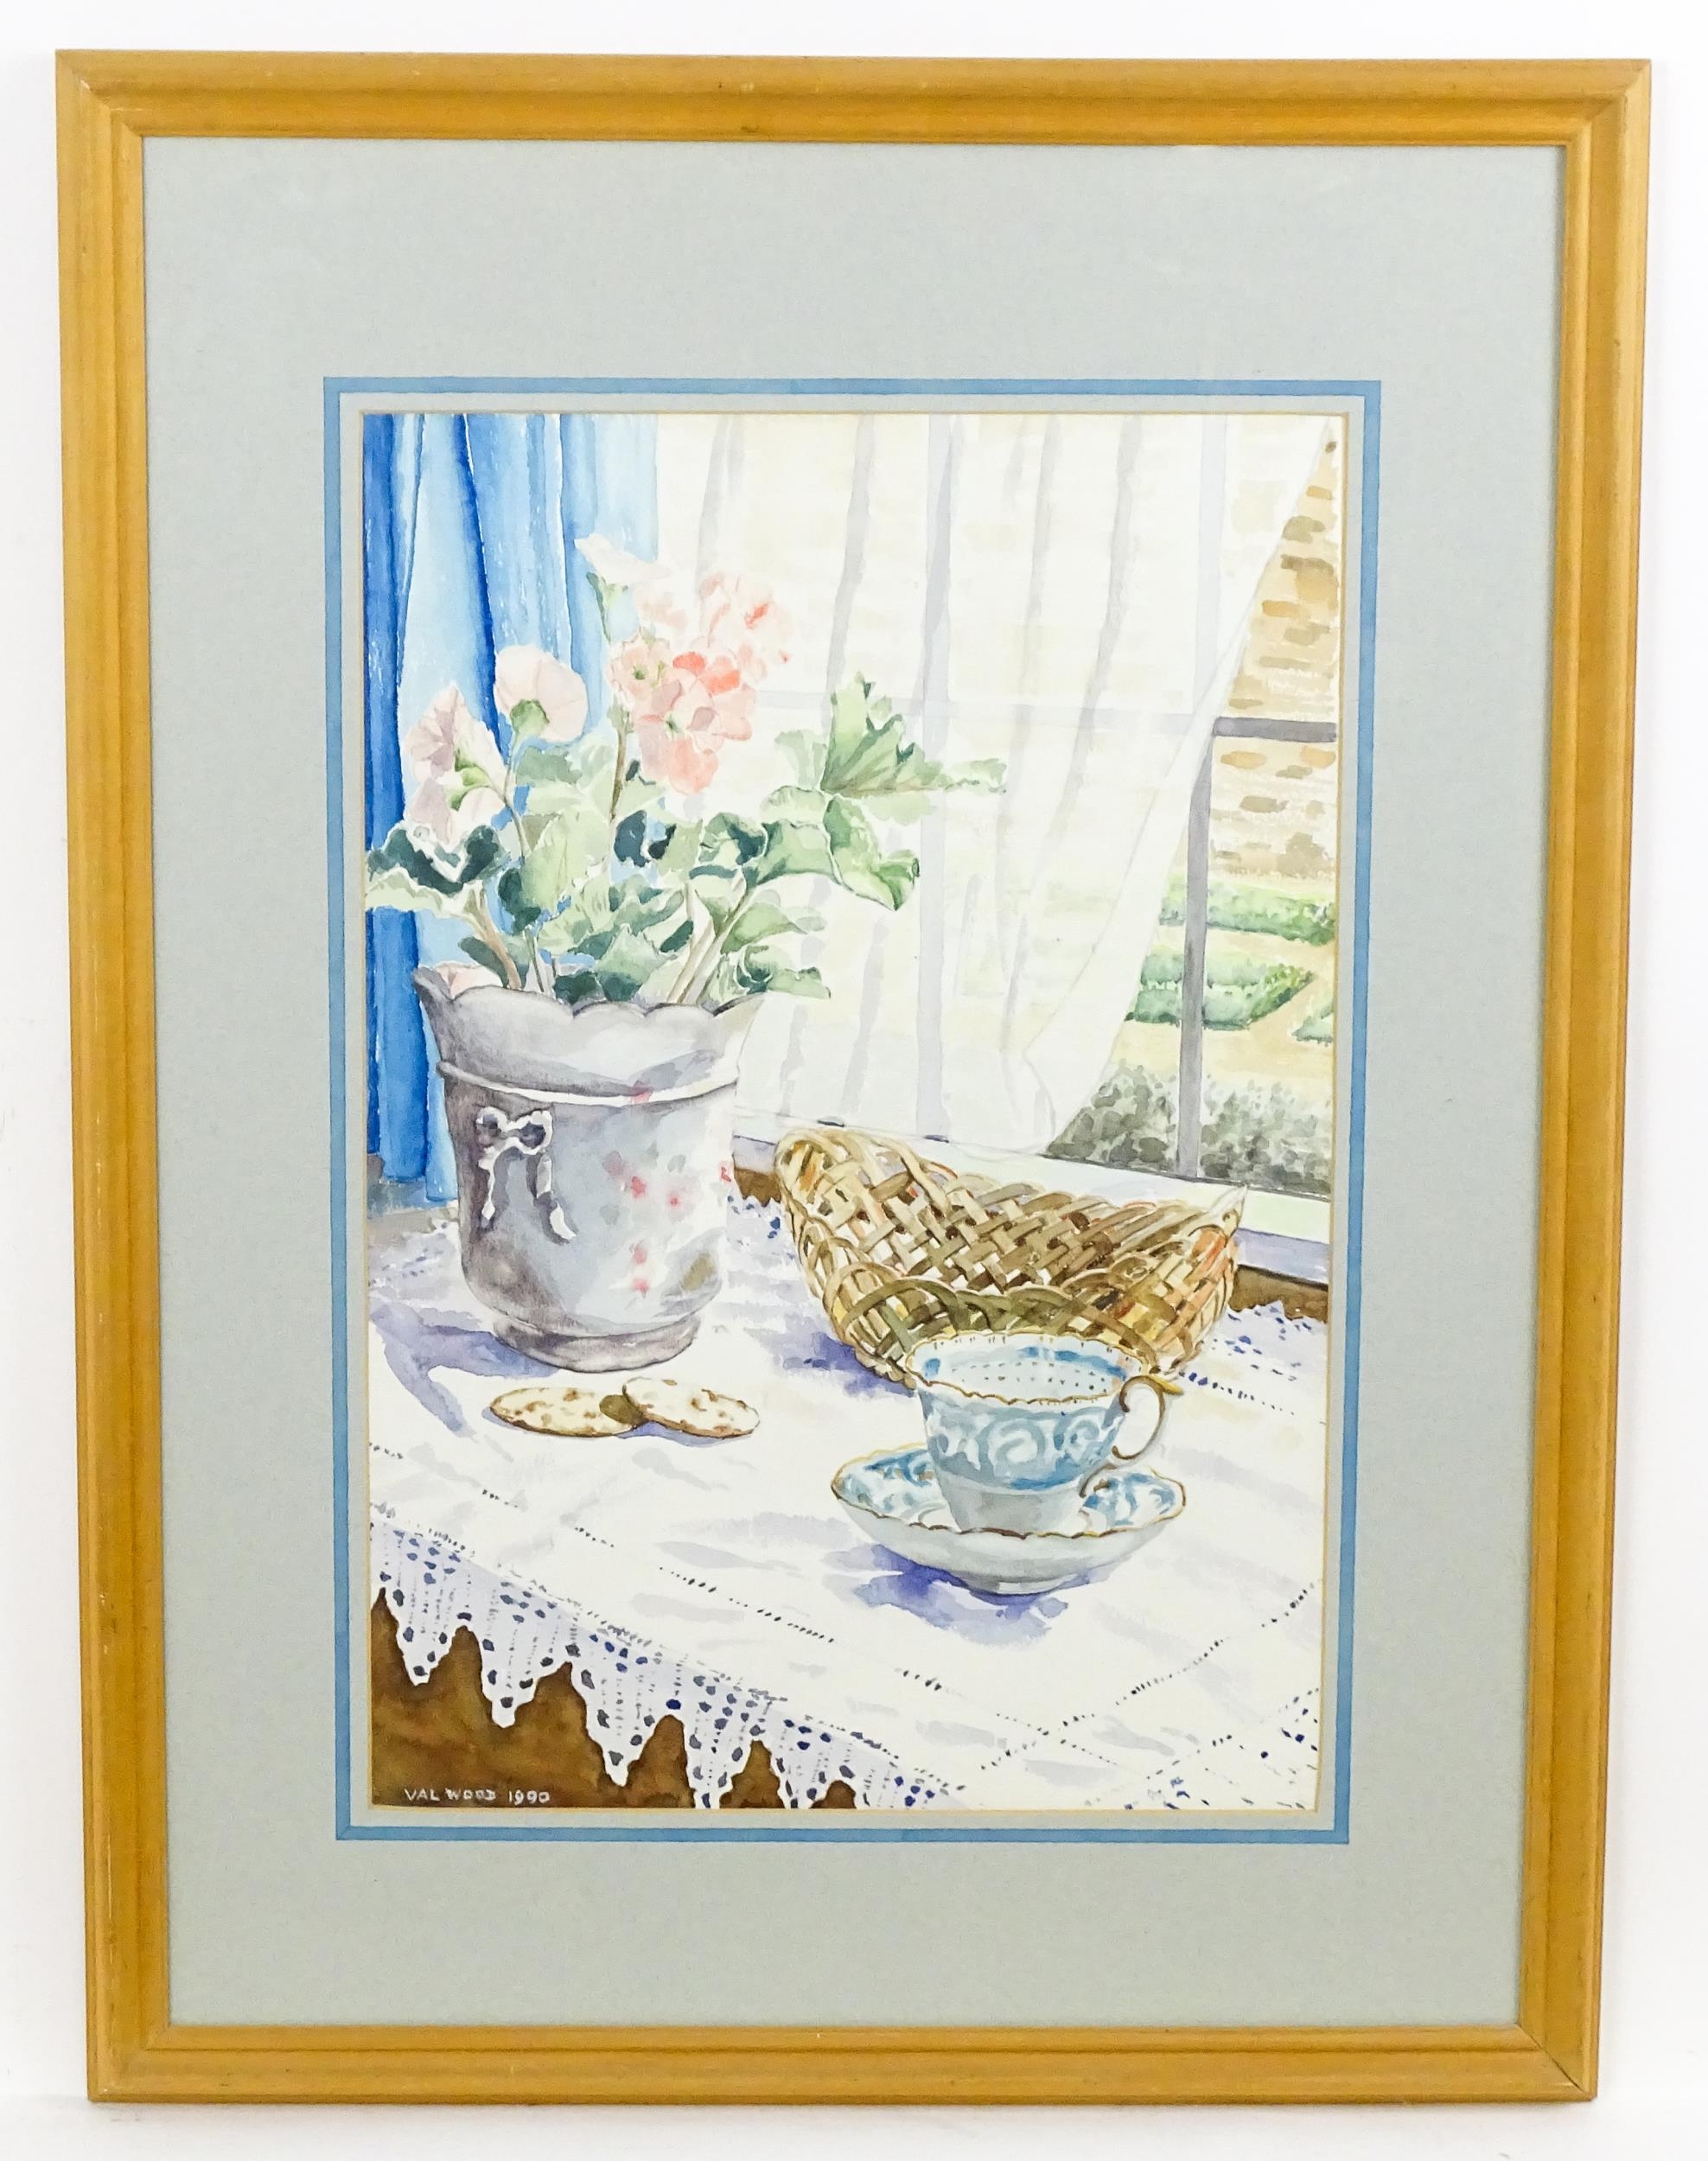 Val Wood, Late 20th century, Watercolour, A still life study of a cup and saucer, woven basket and